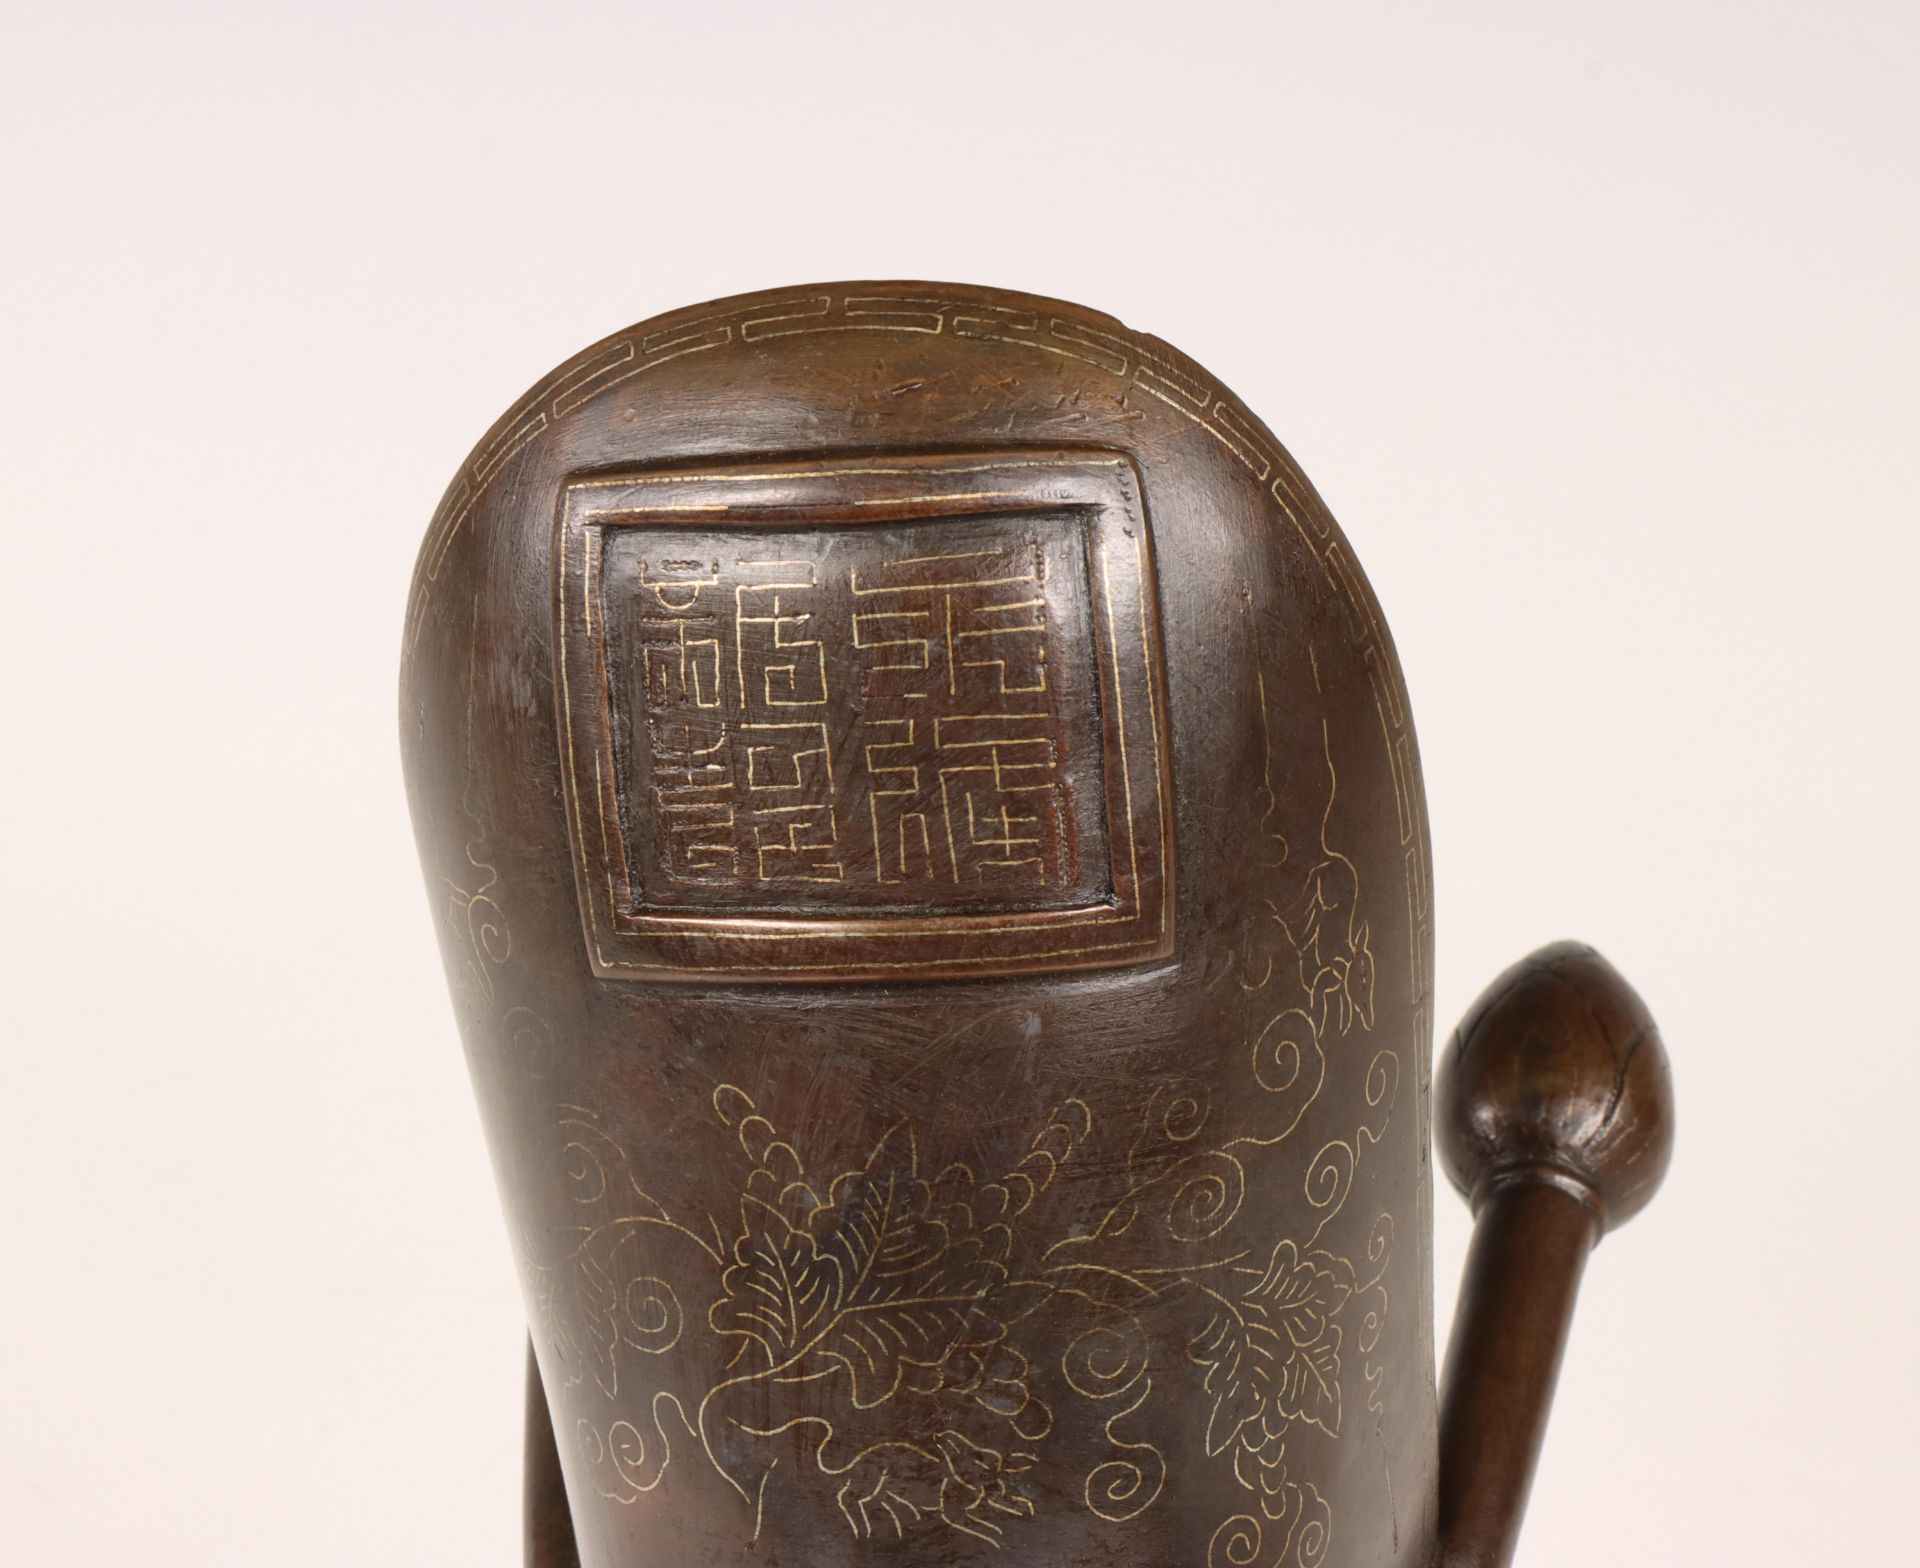 China, a silver-inlaid bronze tripod ritual wine vessel vase, Qing dynasty, 18th century, - Image 5 of 7